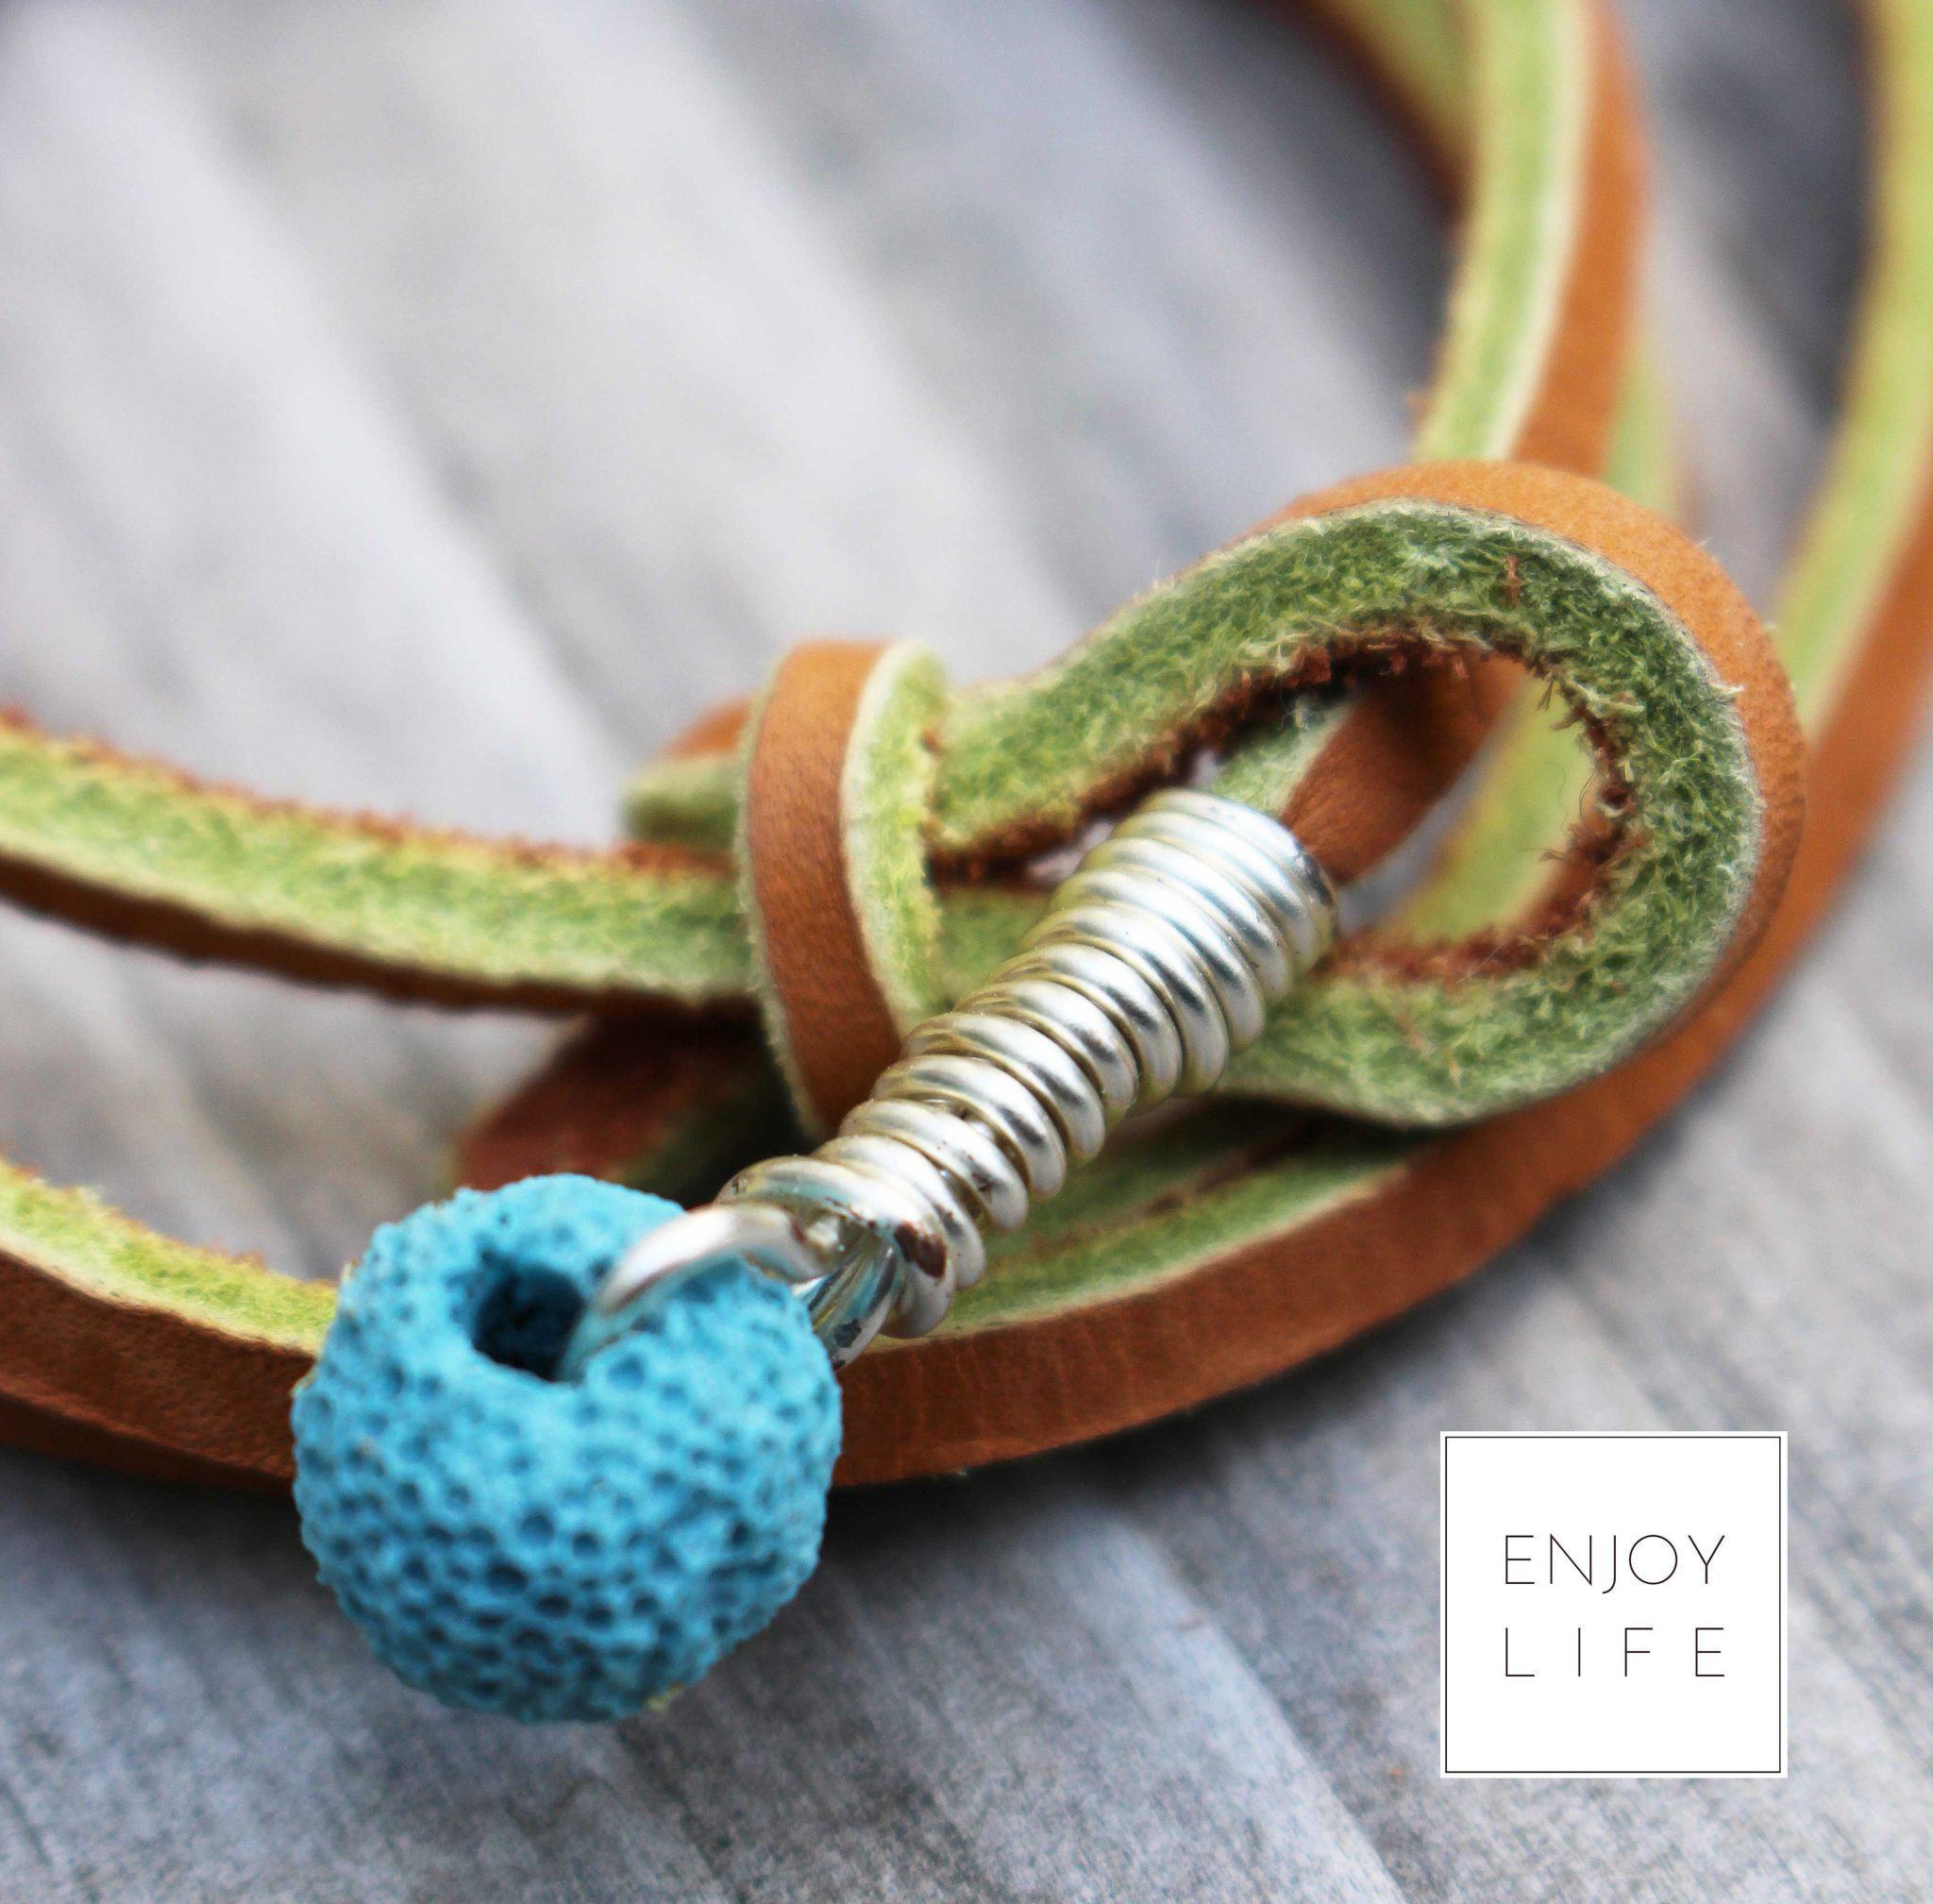 ENJOY LIFE diffuser jewelry coming soon. Get into secret group to pre-order https://www.facebook.com/groups/enjoylifeoilsshop/